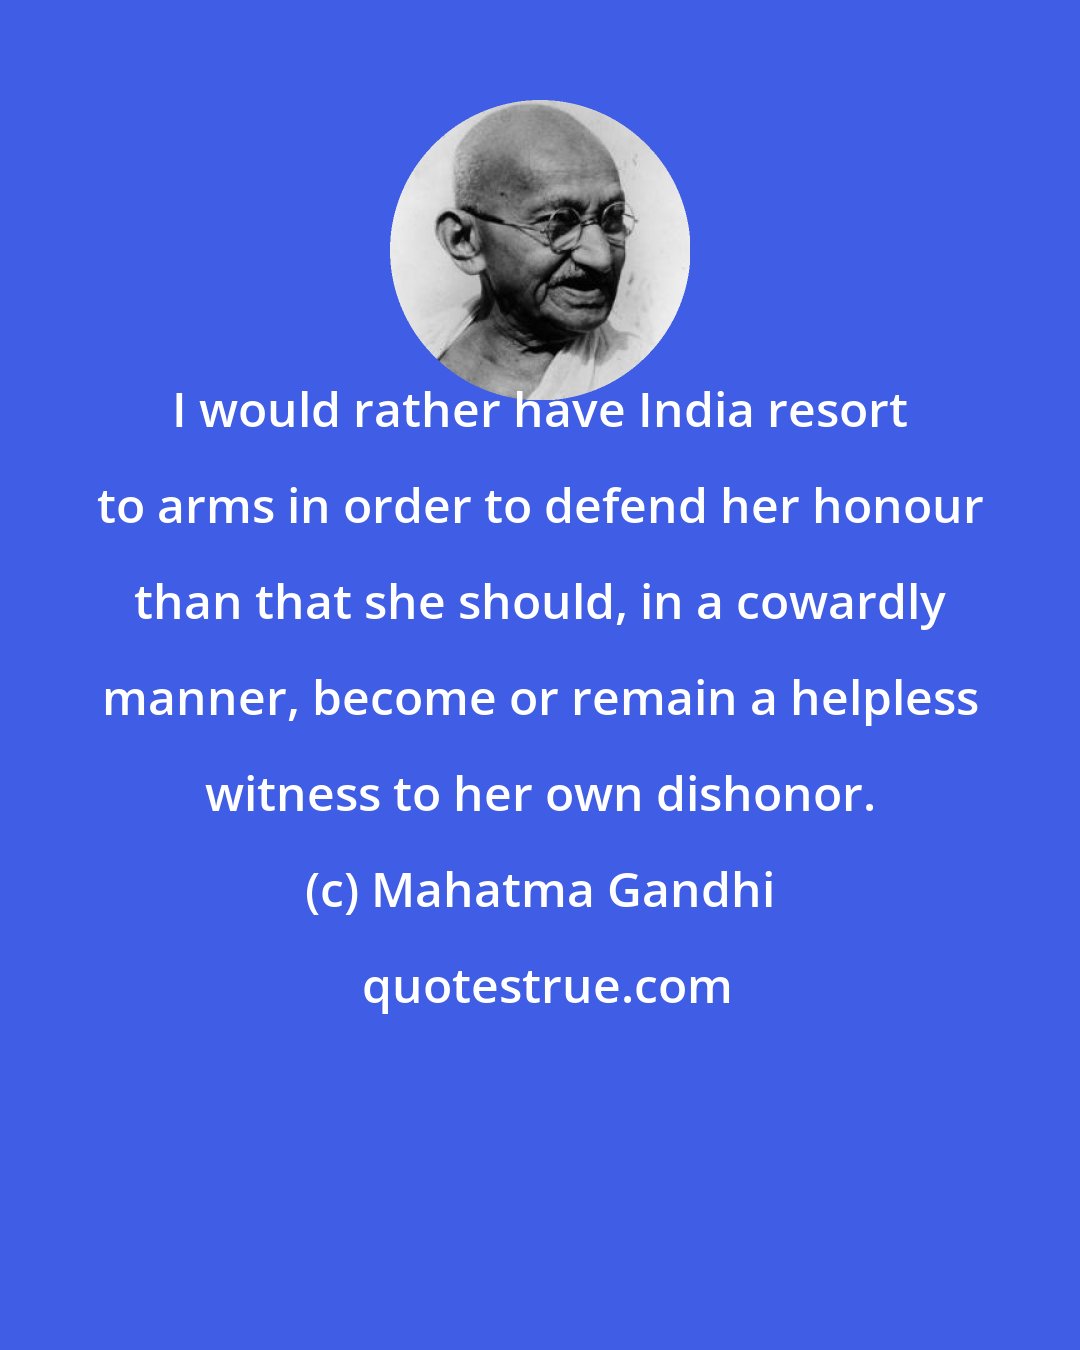 Mahatma Gandhi: I would rather have India resort to arms in order to defend her honour than that she should, in a cowardly manner, become or remain a helpless witness to her own dishonor.